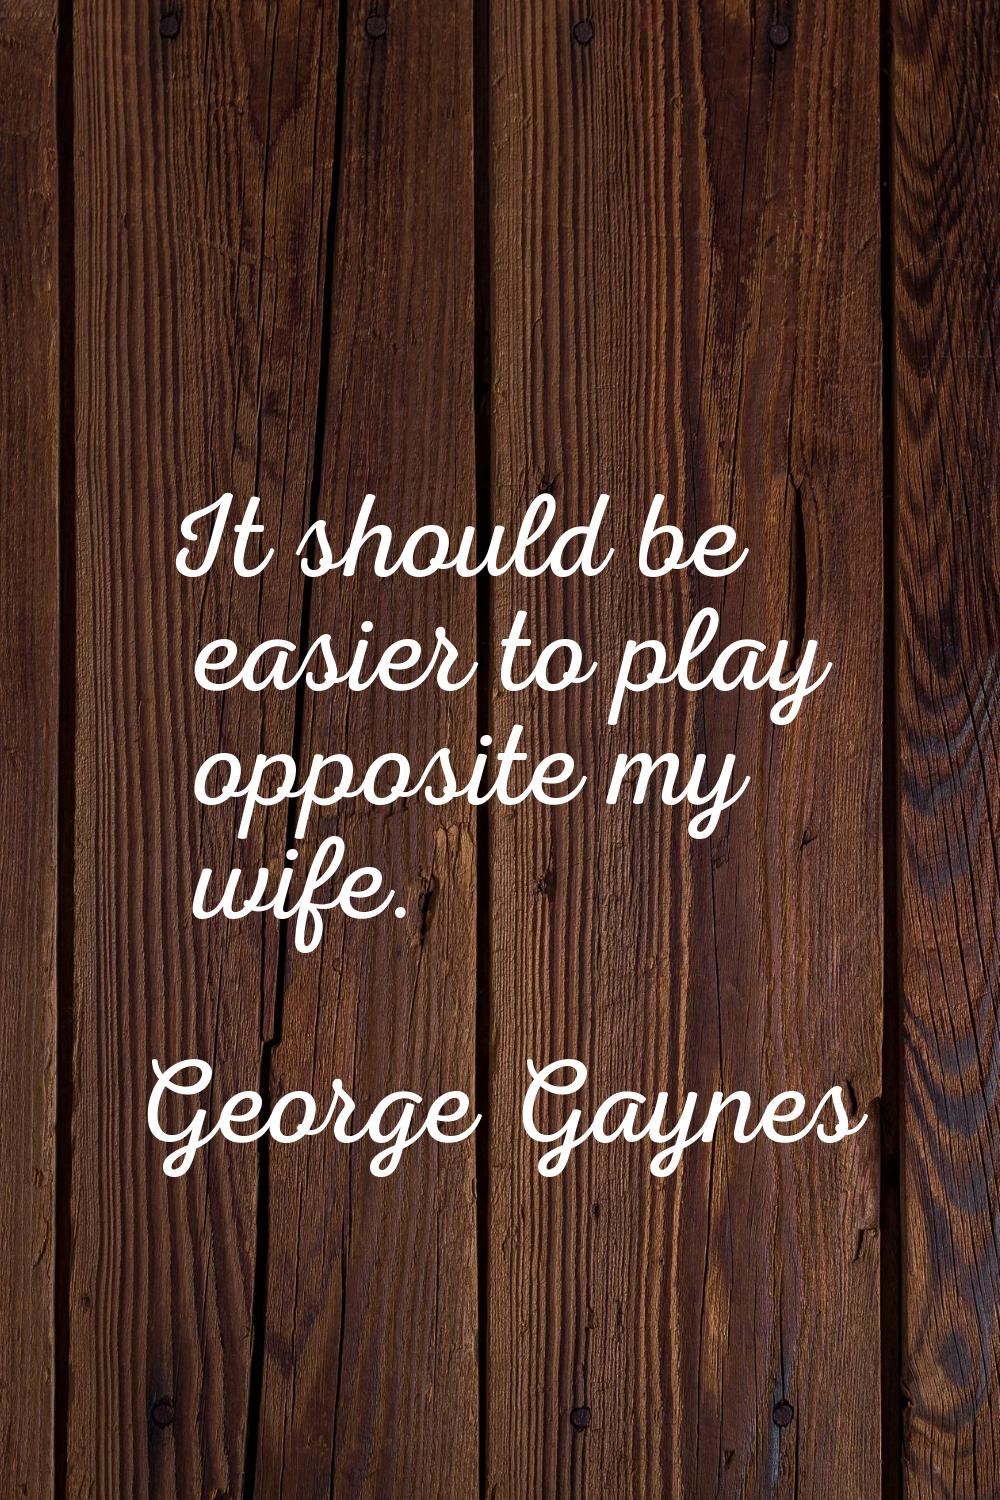 It should be easier to play opposite my wife.